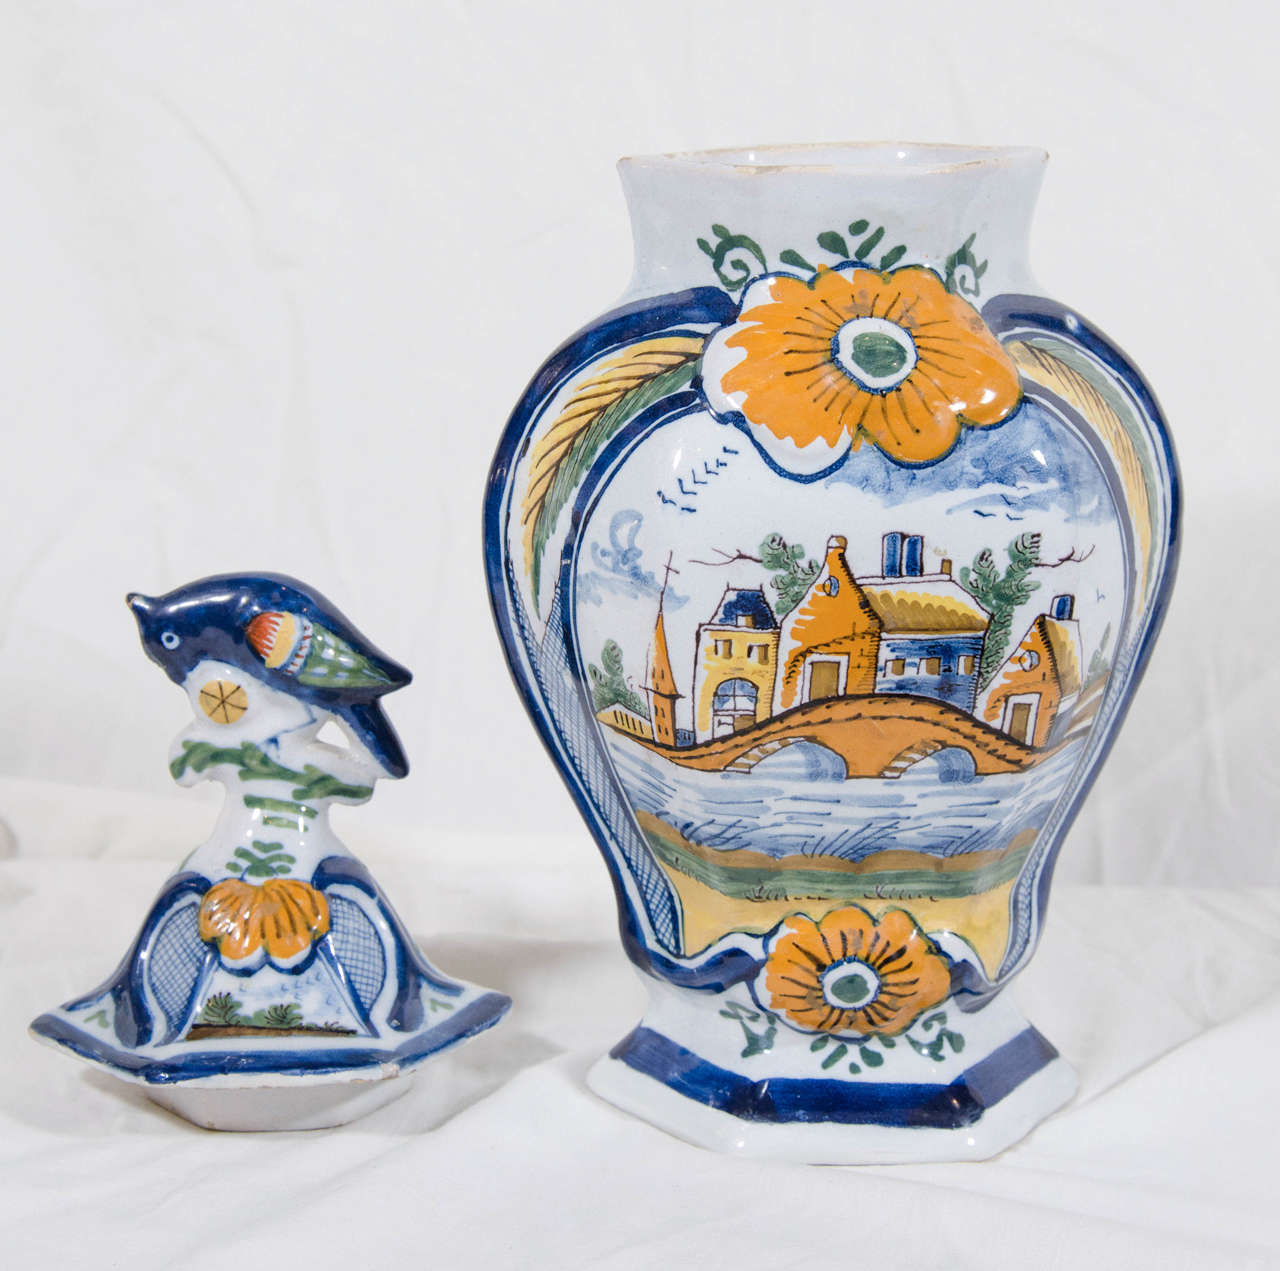 A pair of 18th century Dutch Delft polychrome covered mantle vases. They show a brightly colored village scene with a bridge over a river. The covers have traditional bird finials.